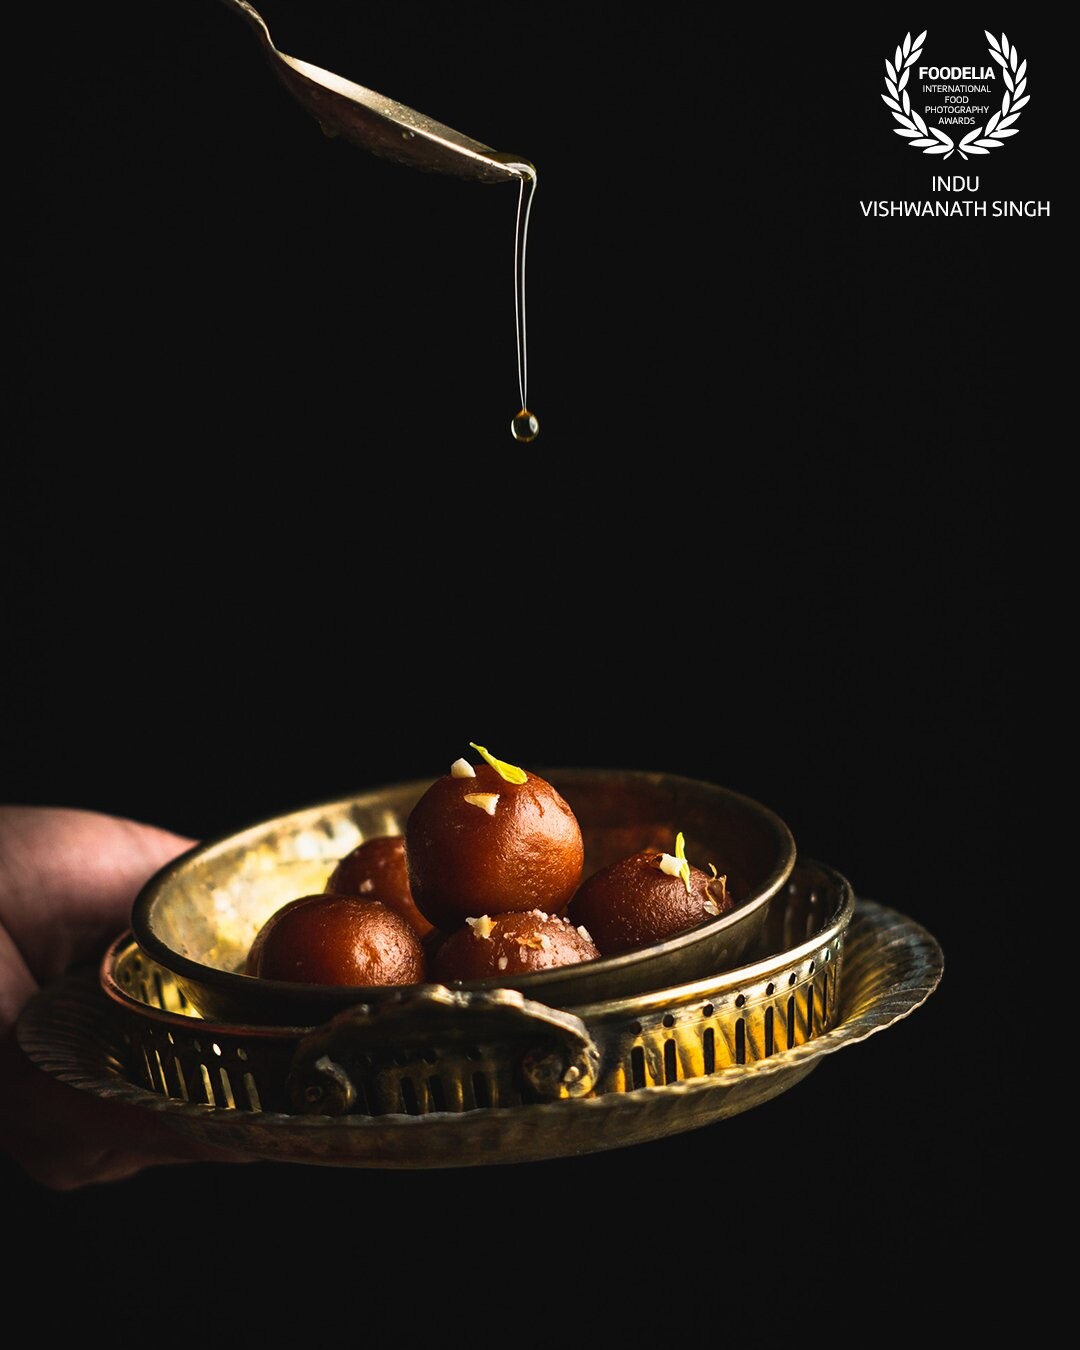 The drip of liquid sugar is the highlight of this image with the hint of Indian culture with the help of antique Indian props. Gulab Jamuns are a traditional festive dessert in India